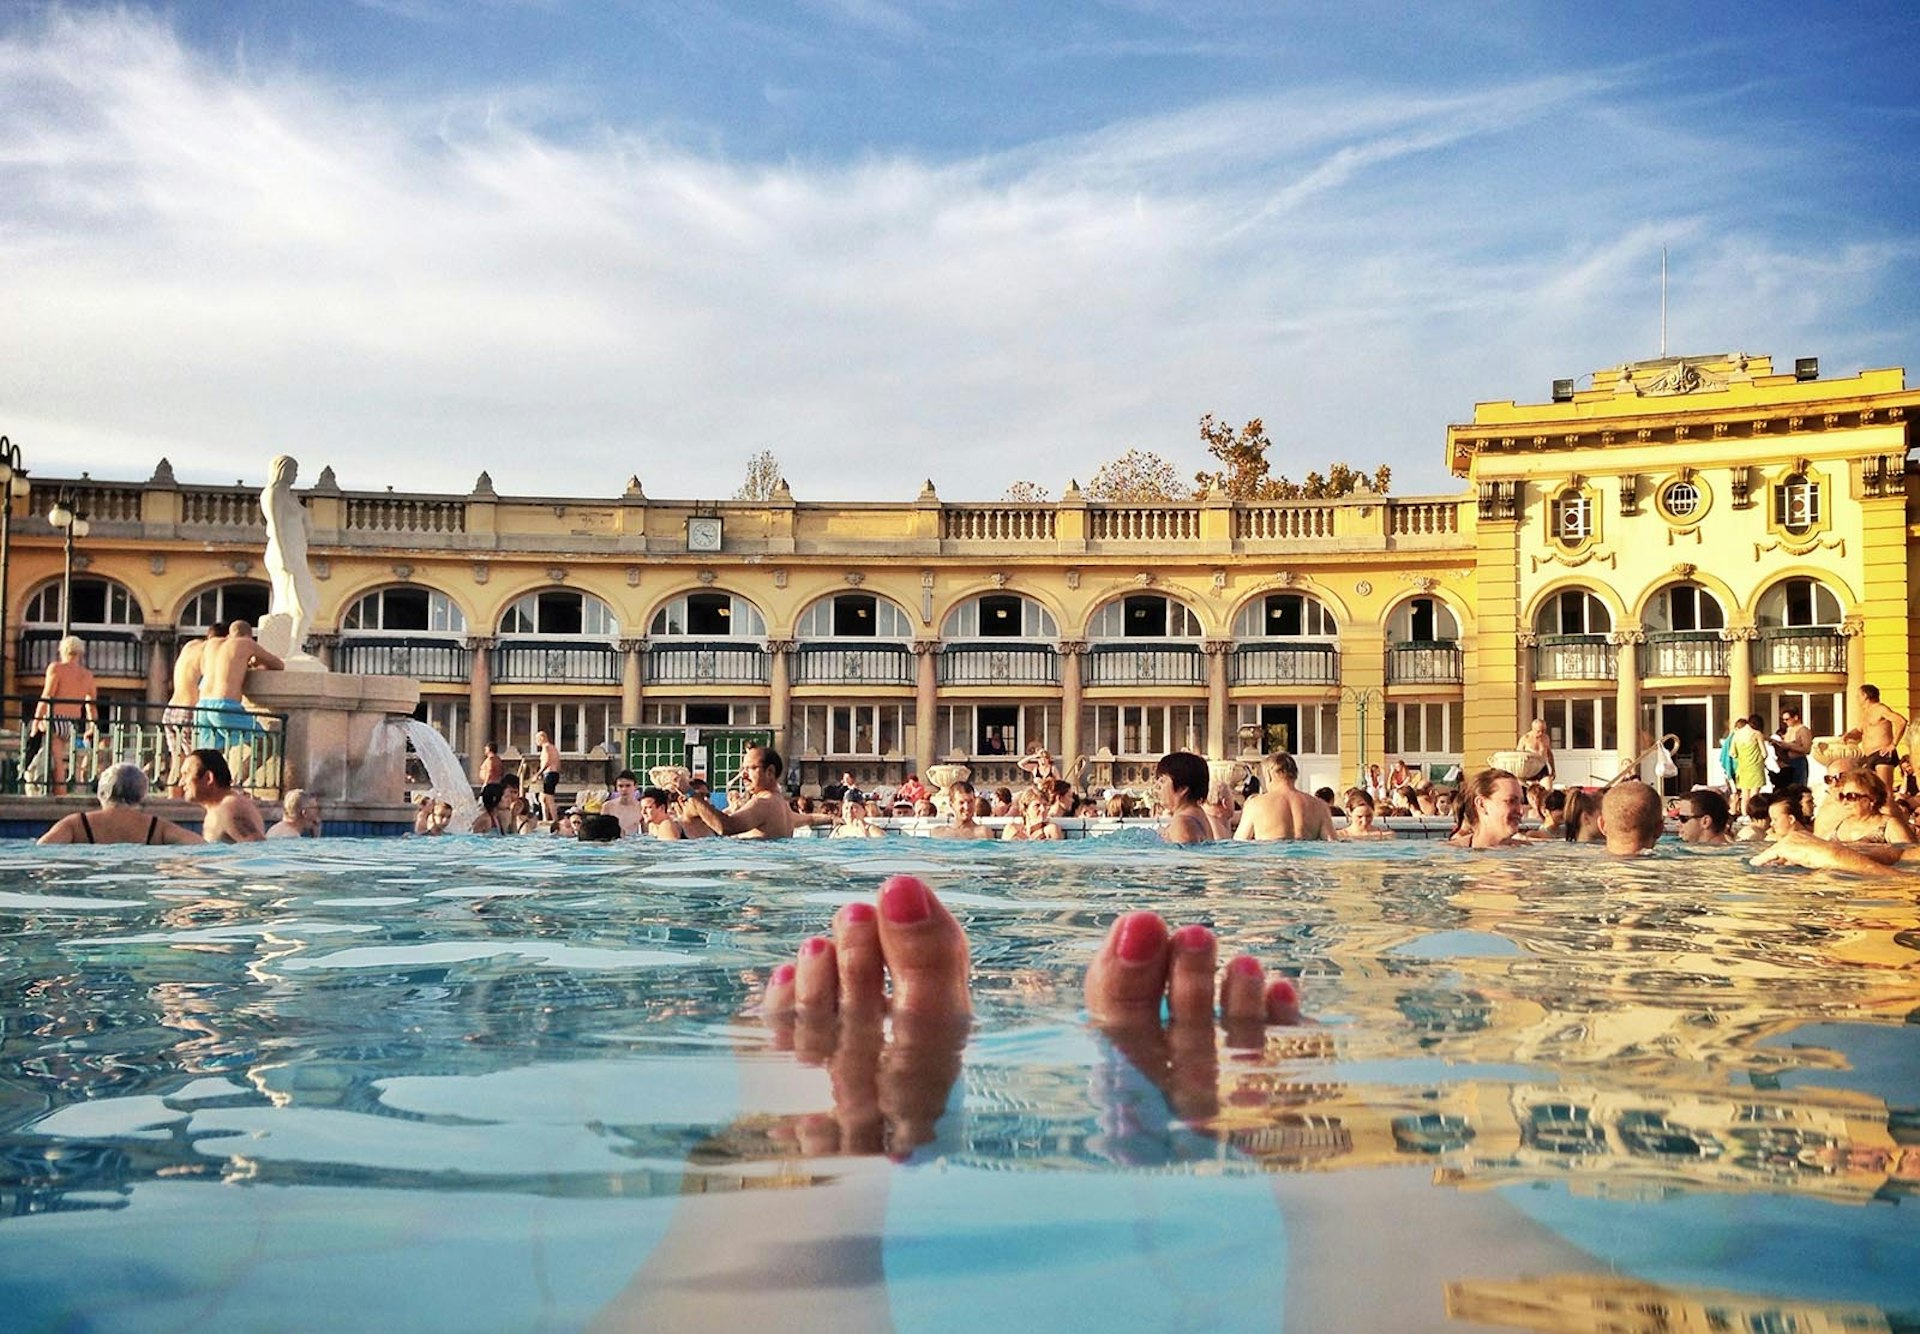 A person bathing at Széchenyi Thermal Baths in Budapest